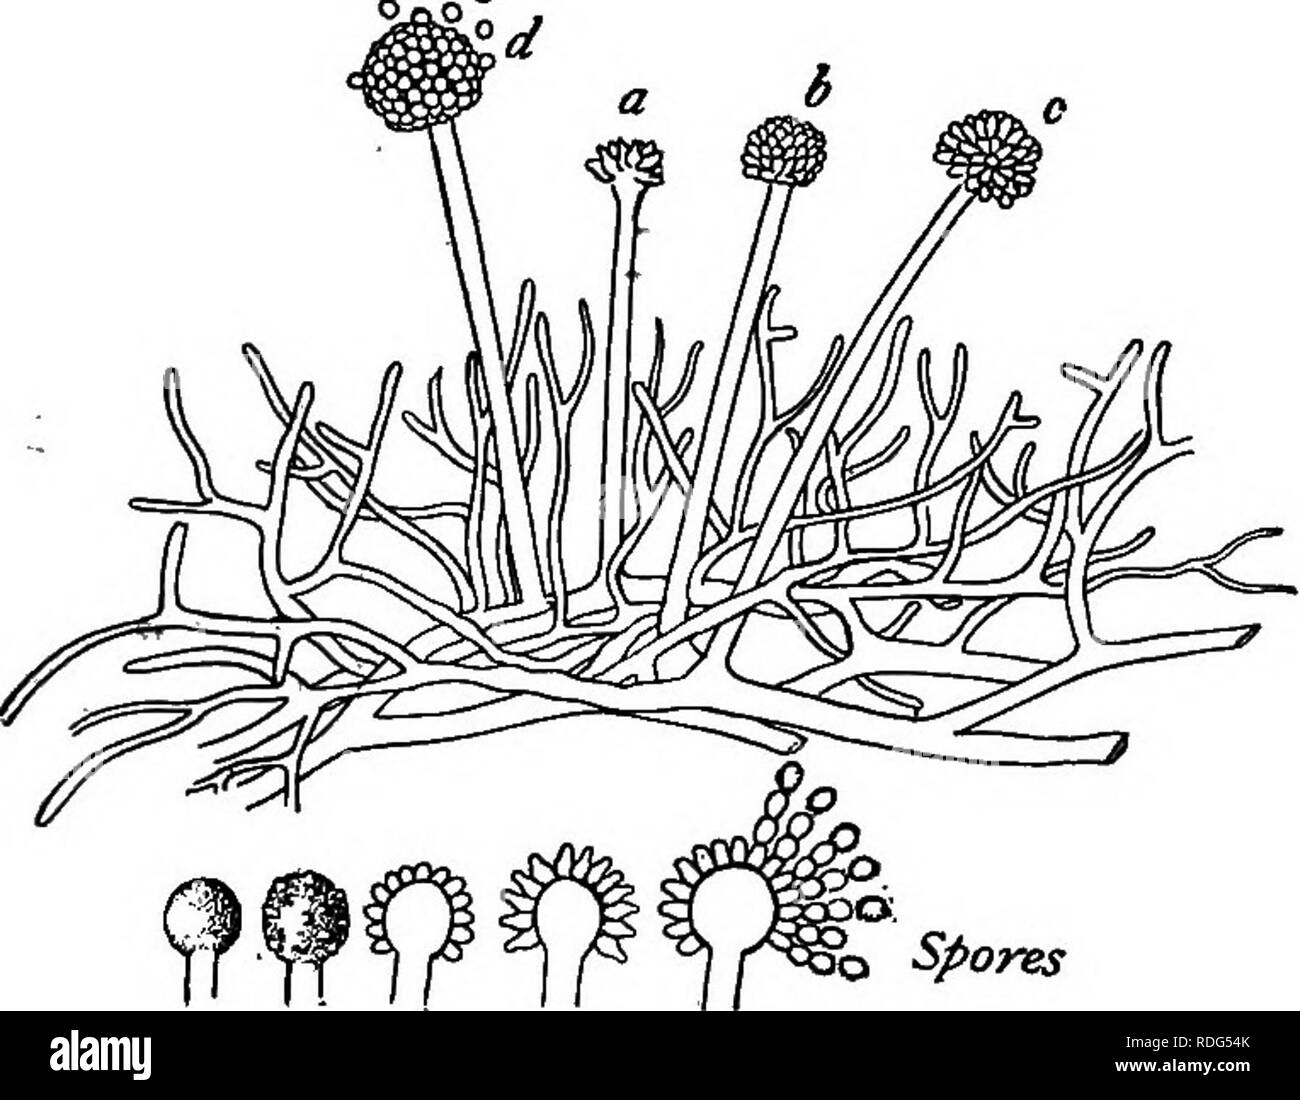 . Essentials of botany. Botany; Botany. THE FUNGI 251 potassium hydrate some time before they are to be examined. In the mycelial threads note: (a) The color (if any). (6) The mode of branching. (c) The presence or absence of cross-partitions. Draw. II. CONIDIA. Examine with h.p. a slide prepared as in I, and note: (a) The size, shape, and color of the conidia. (6) The manner in which the conidiar-bearing branches are. Tig. 175. A Colony of Aspergillus, a Sac Fungus, one of the Com- mon Molds, showing Mycelium and Spore-Clusters. The lower figures show in detail the method of spore formation.  Stock Photo